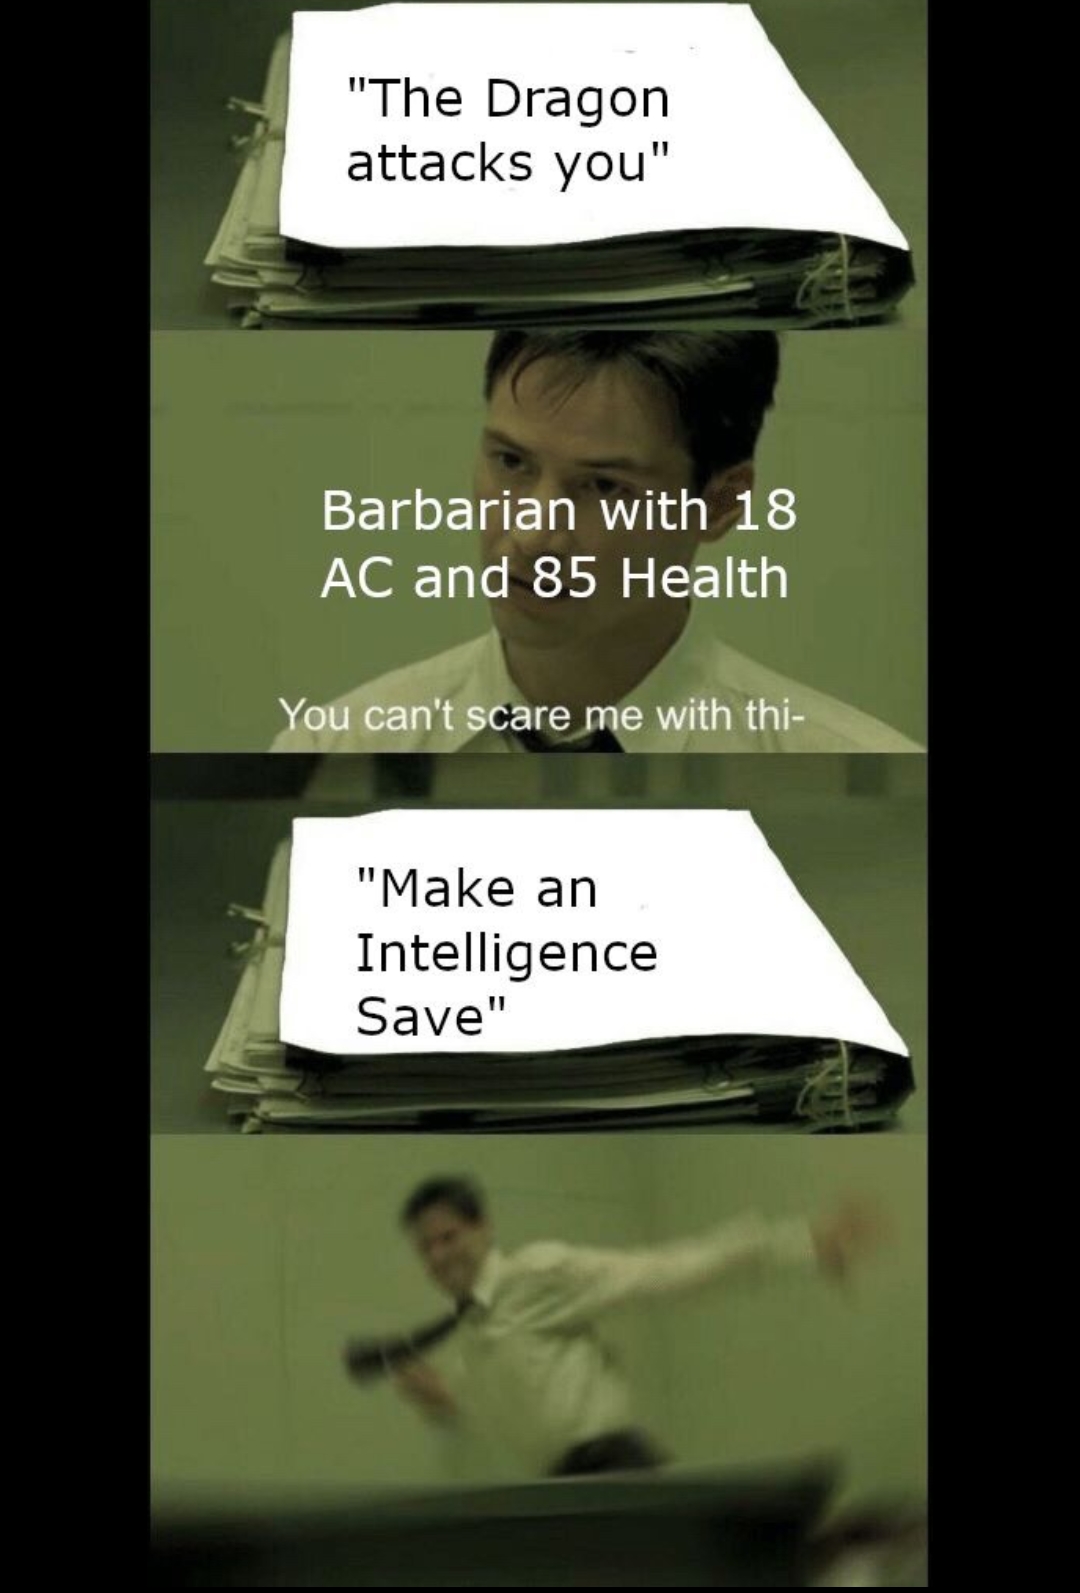 john wick matrix meme - "The Dragon attacks you" Barbarian with 18 Ac and 85 Health You can't scare me with thi "Make an Intelligence Save"